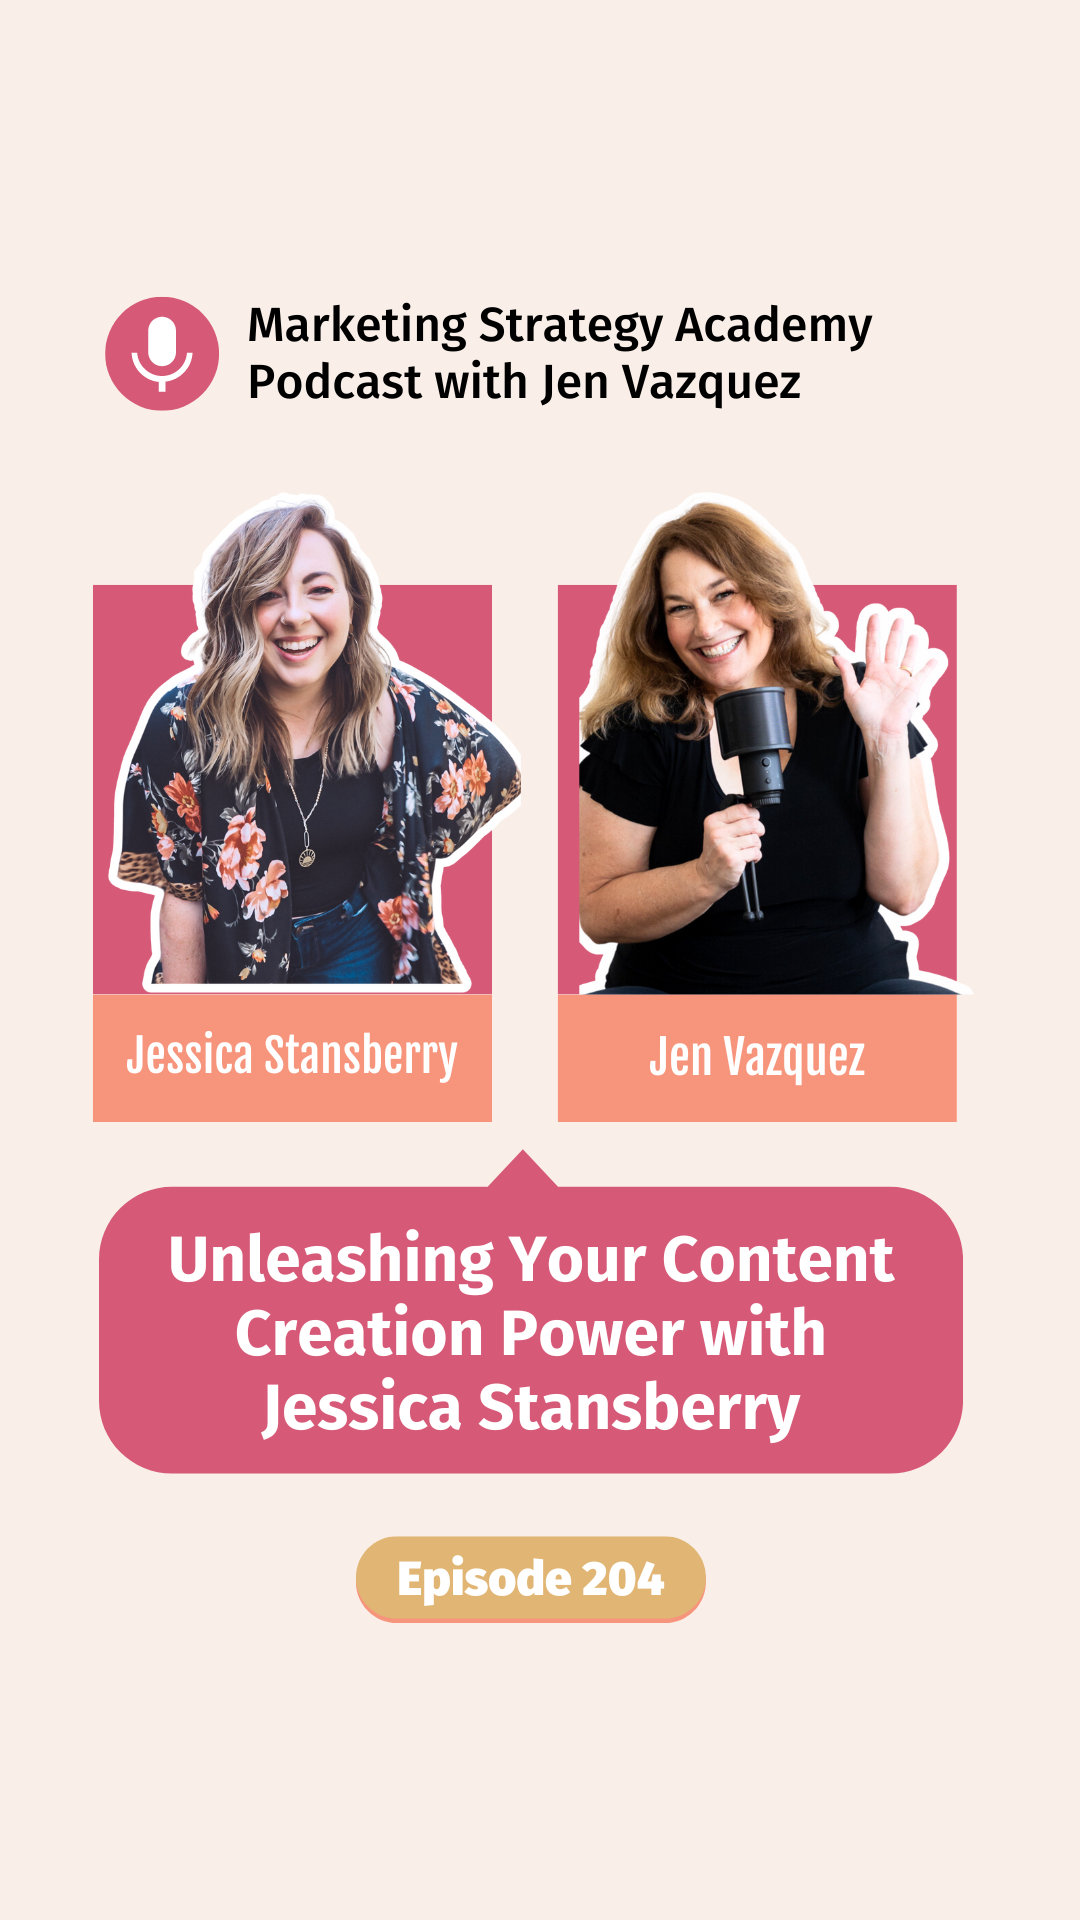 Unleash your content creation power with Jessica Stansberry! Discover her inspiring journey, YouTube growth strategies, and tips on balancing business and content creation in this must-read blog.<br />
